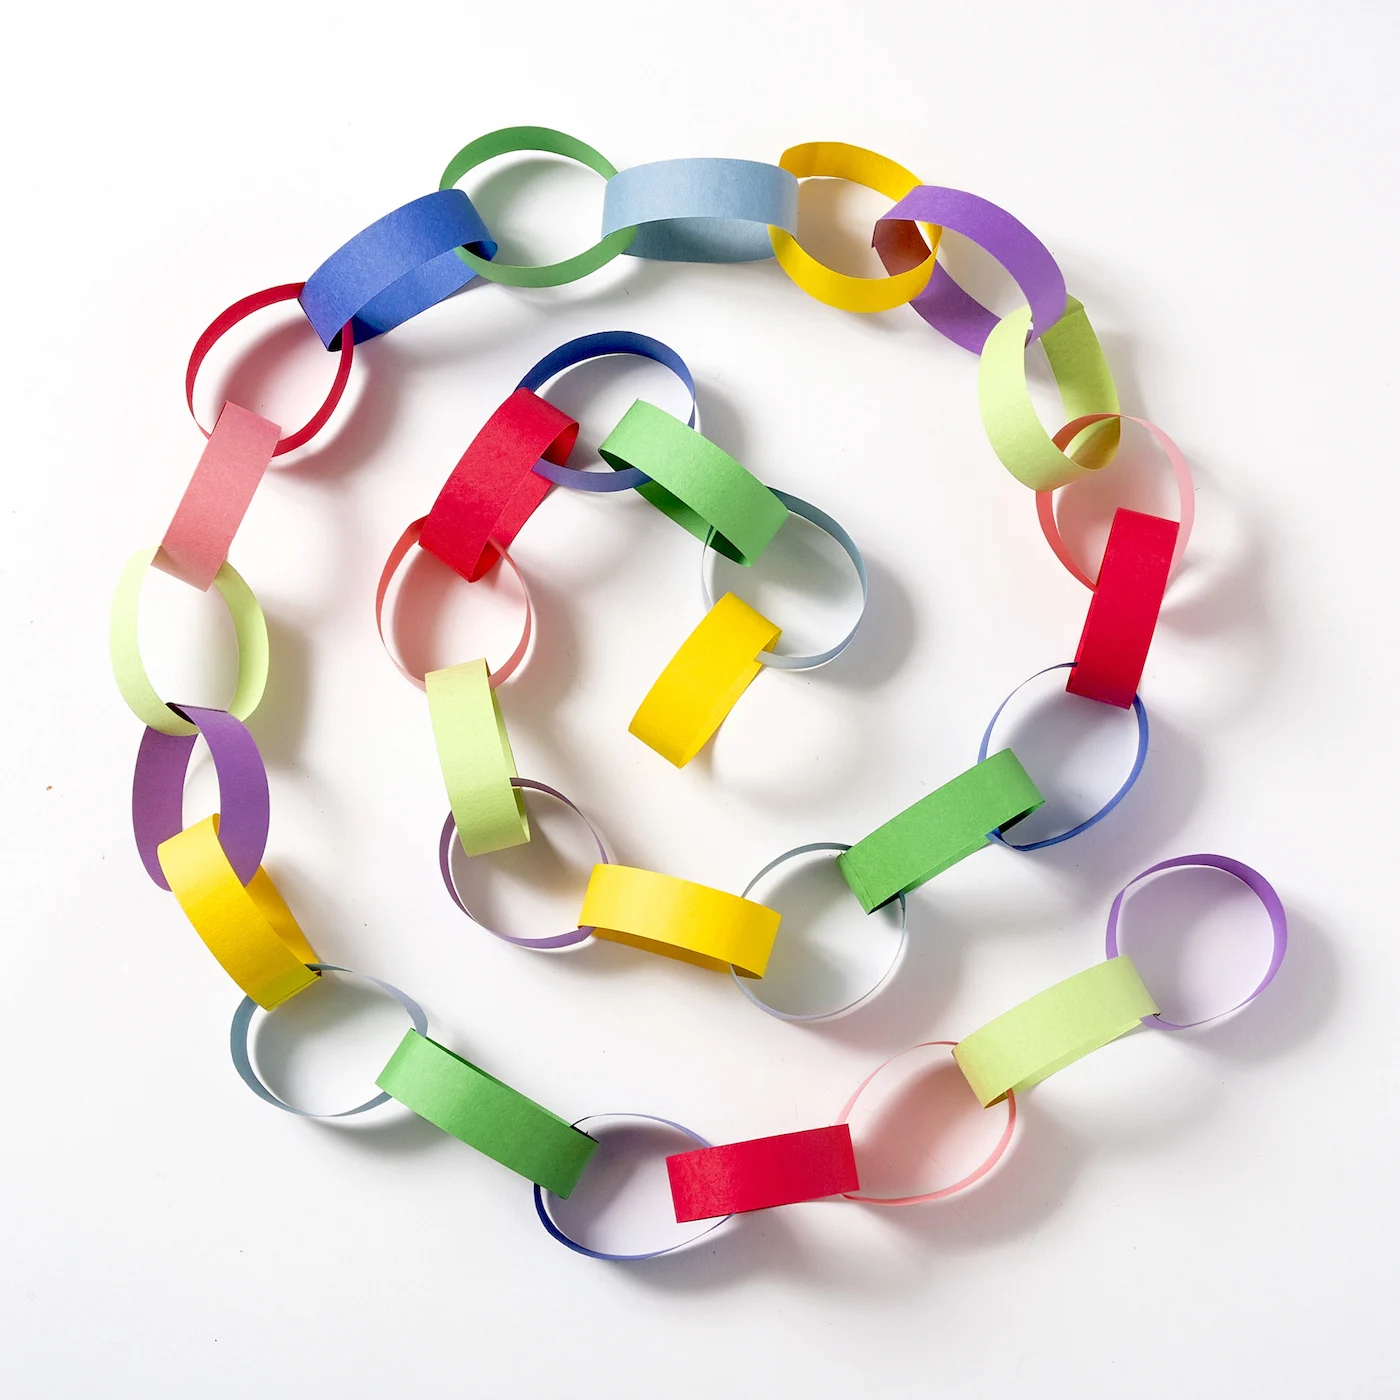 Paper Chain Made in Four Simple Steps - DIY Candy